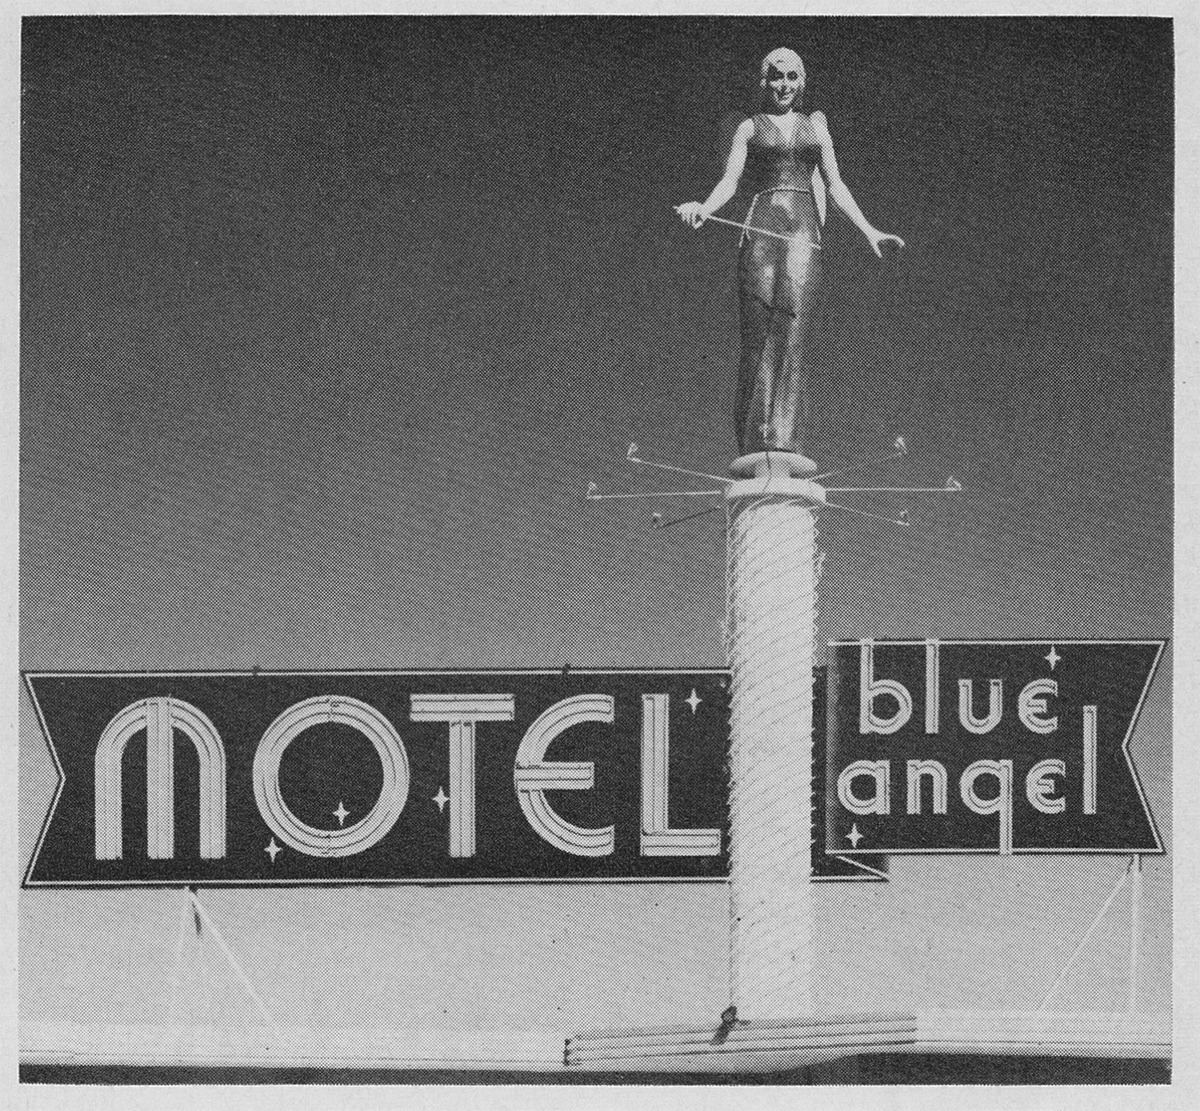 Blue Angel Motel, 1958
Photo from Signs of the Times, Dec. 1958. 15-foot tall fiberglass figure, revolving in 10 seconds, 45 x 6-ft letters. The magazine credits “General Electric Displays of Las Vegas,” though it’s commonly credited to Western...